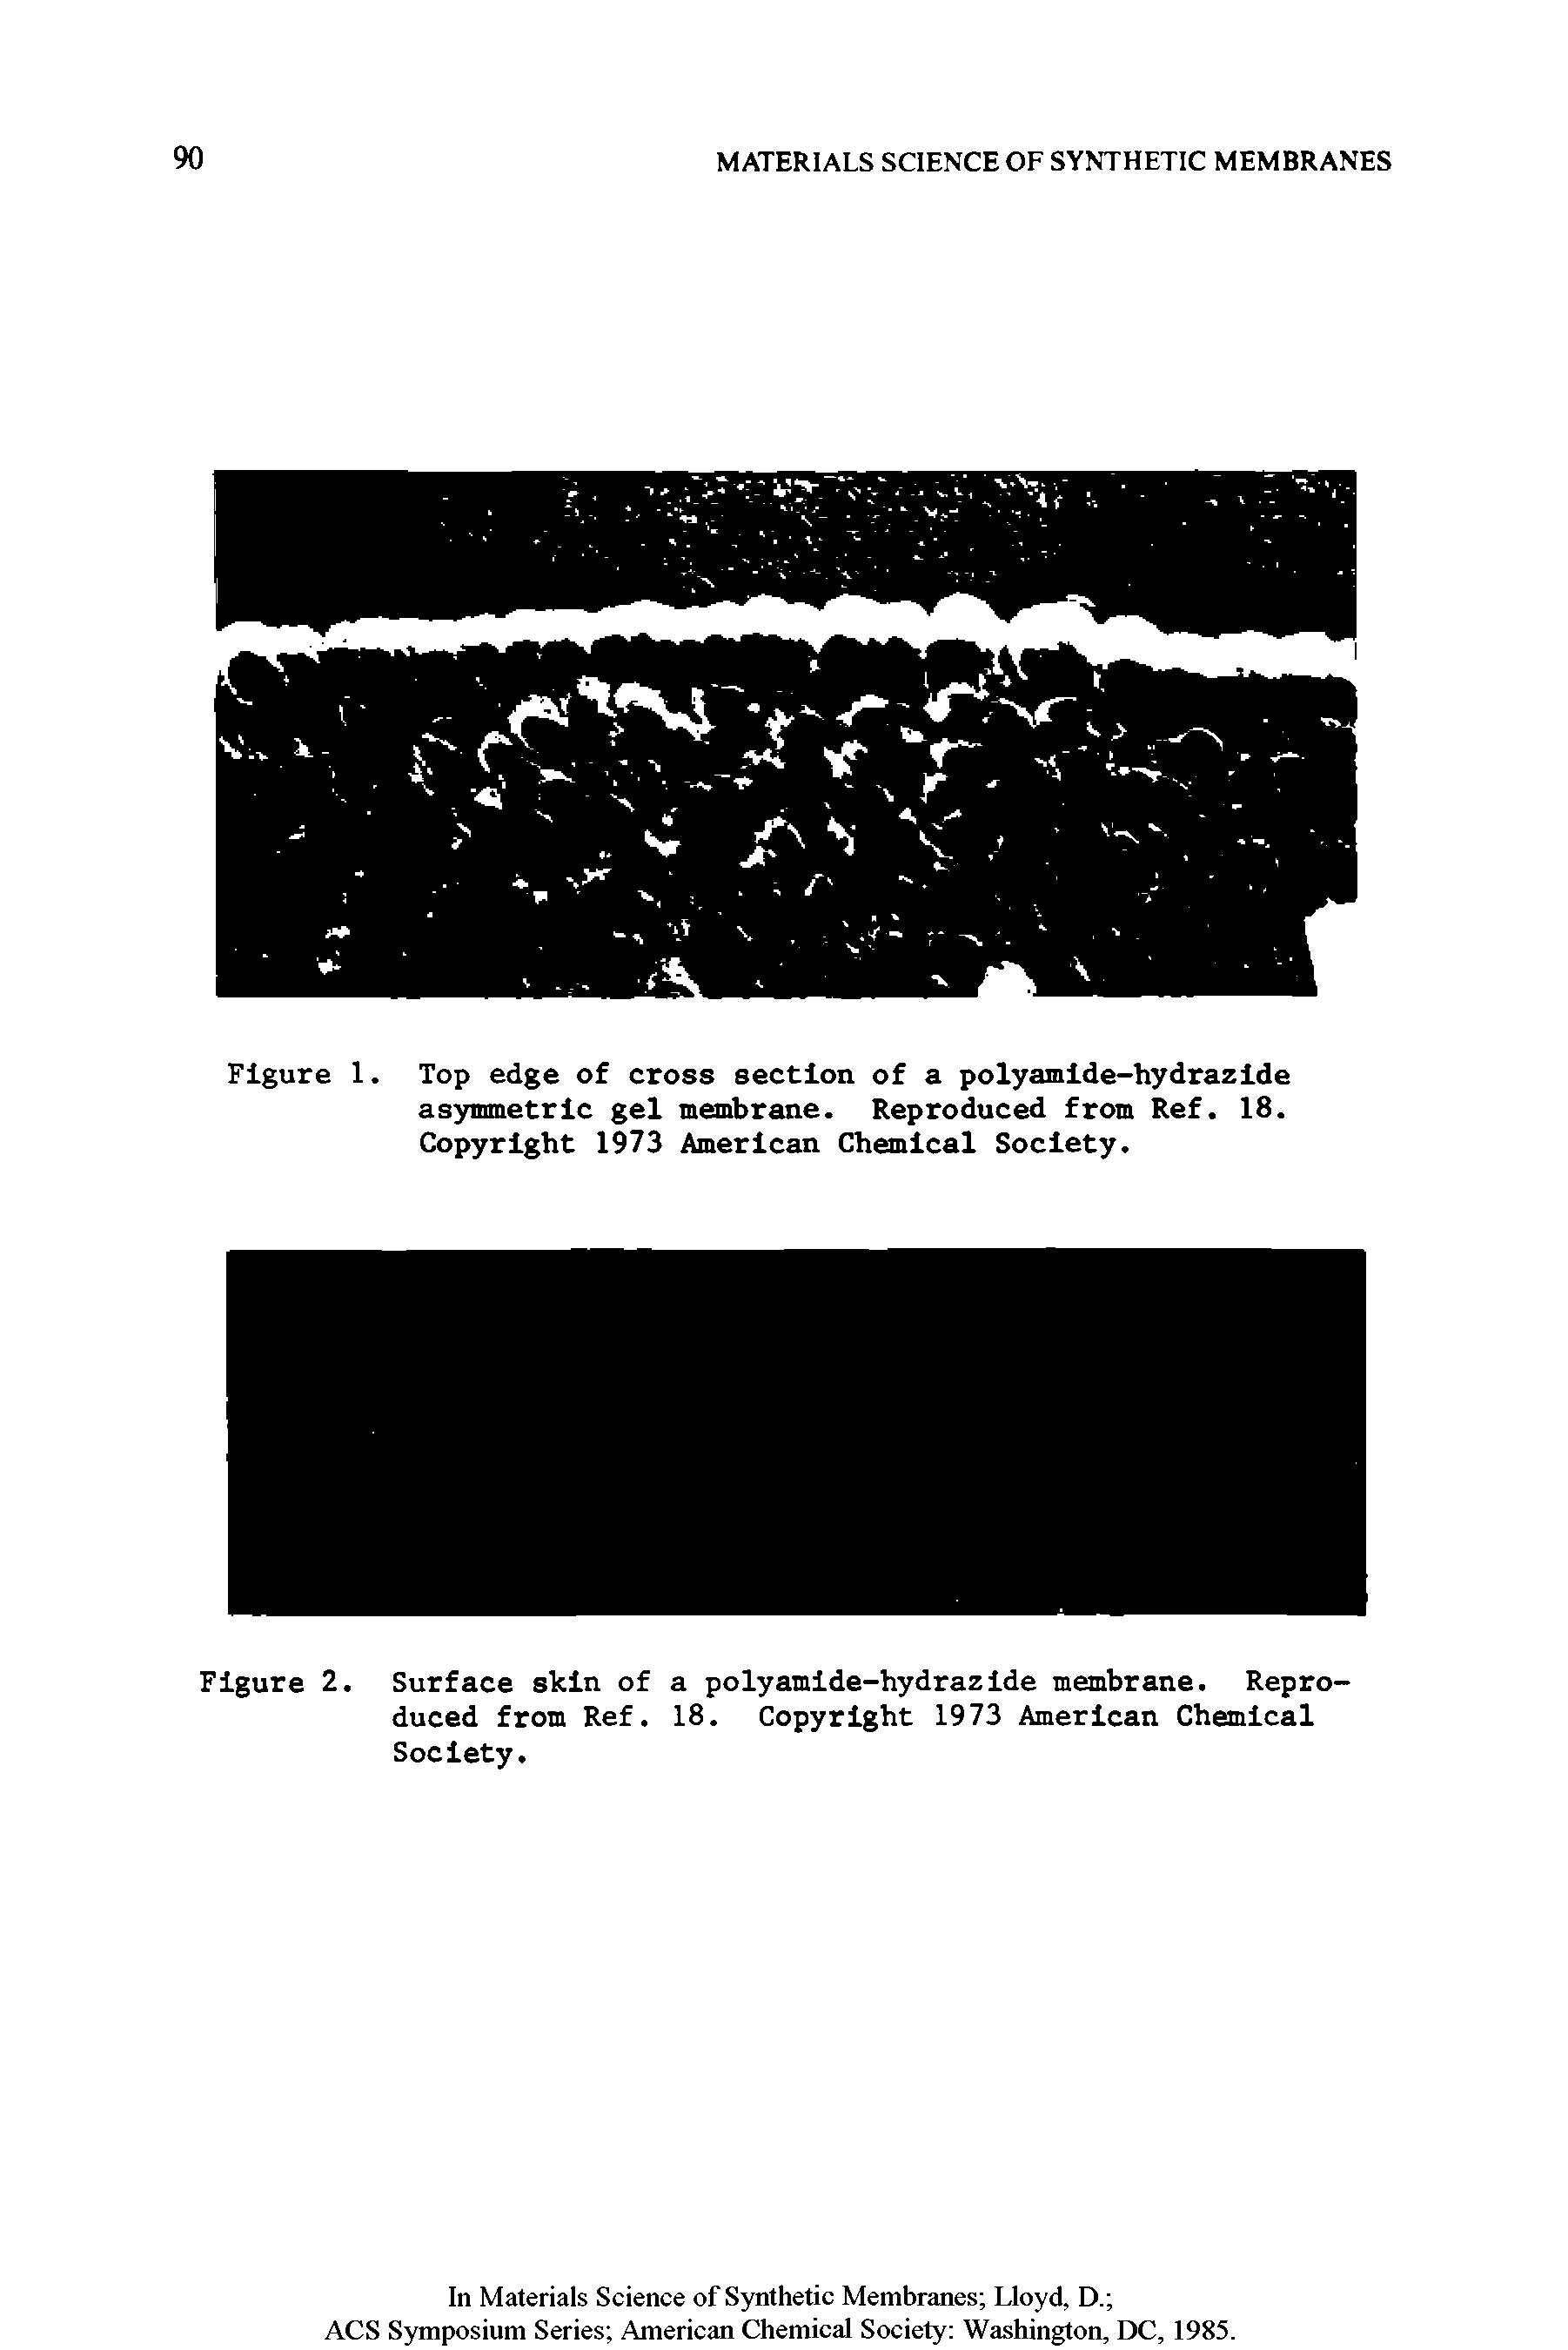 Figure 1. Top edge of cross section of a polyamide-hydrazide asymmetric gel membrane. Reproduced from Ref. 18. Copyright 1973 American Chemical Society.